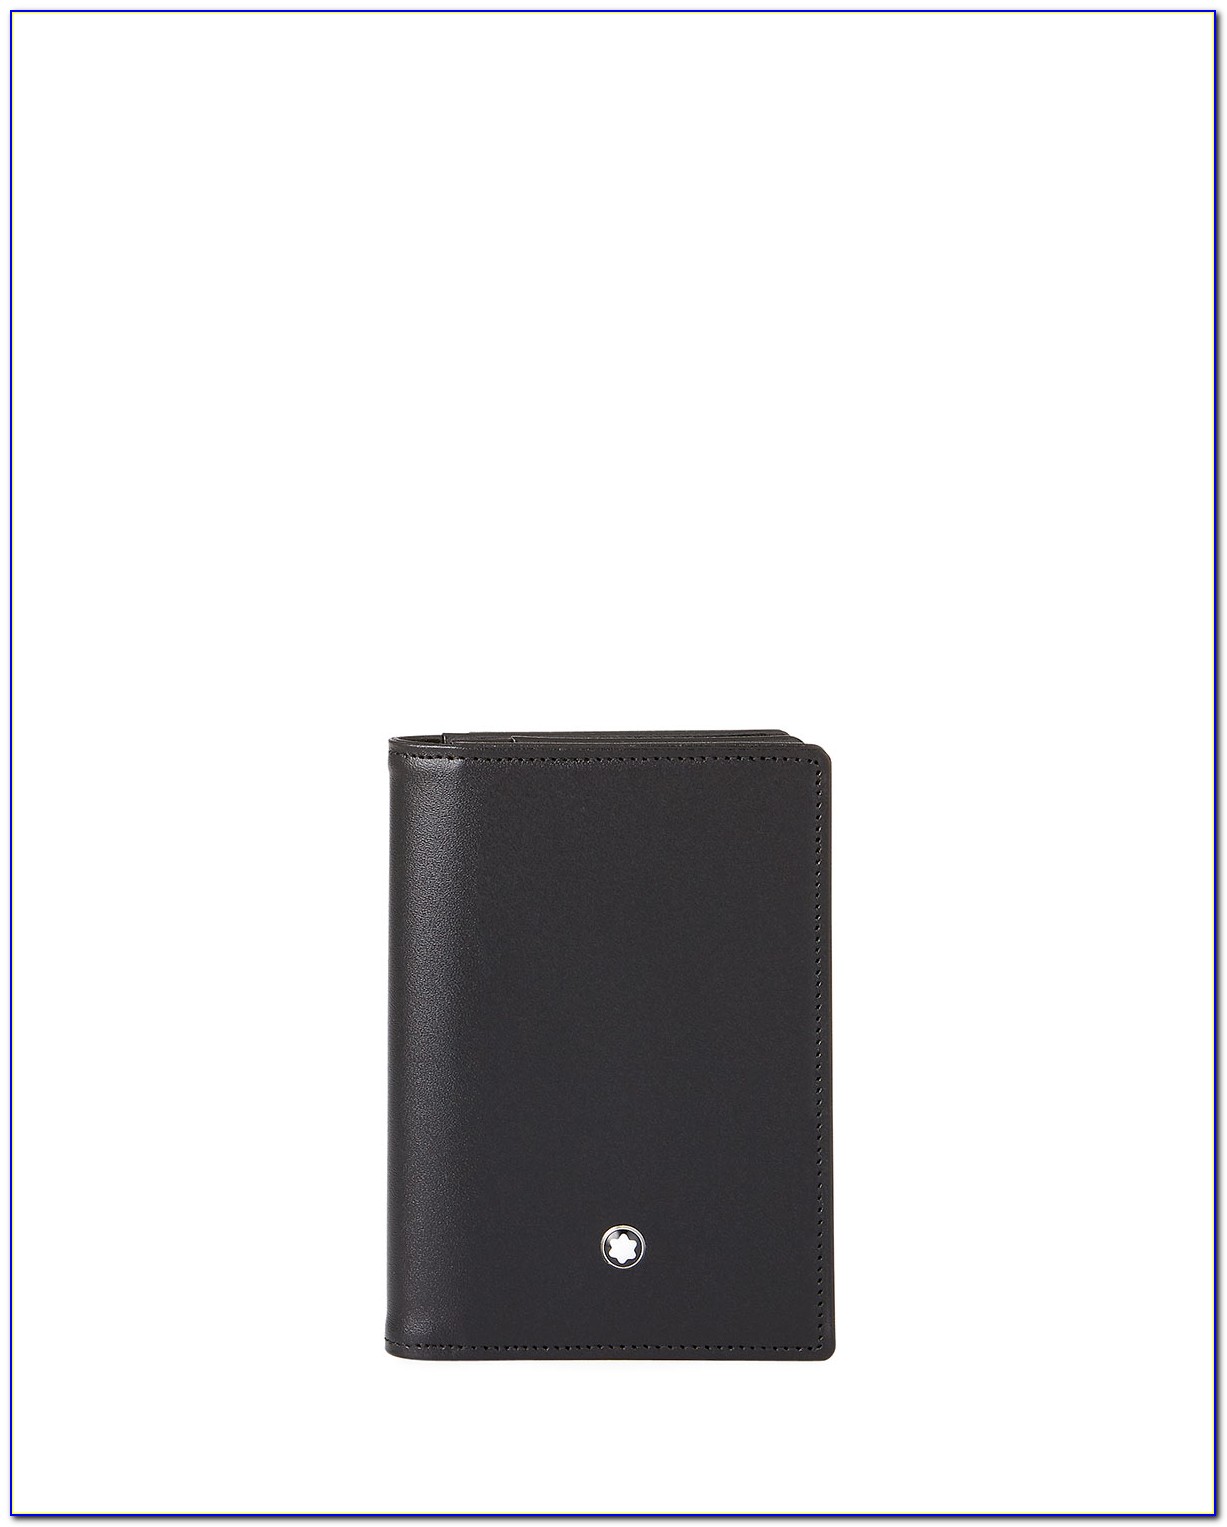 Montblanc Meisterstuck Business Card Holder With Gusset Mb 7167